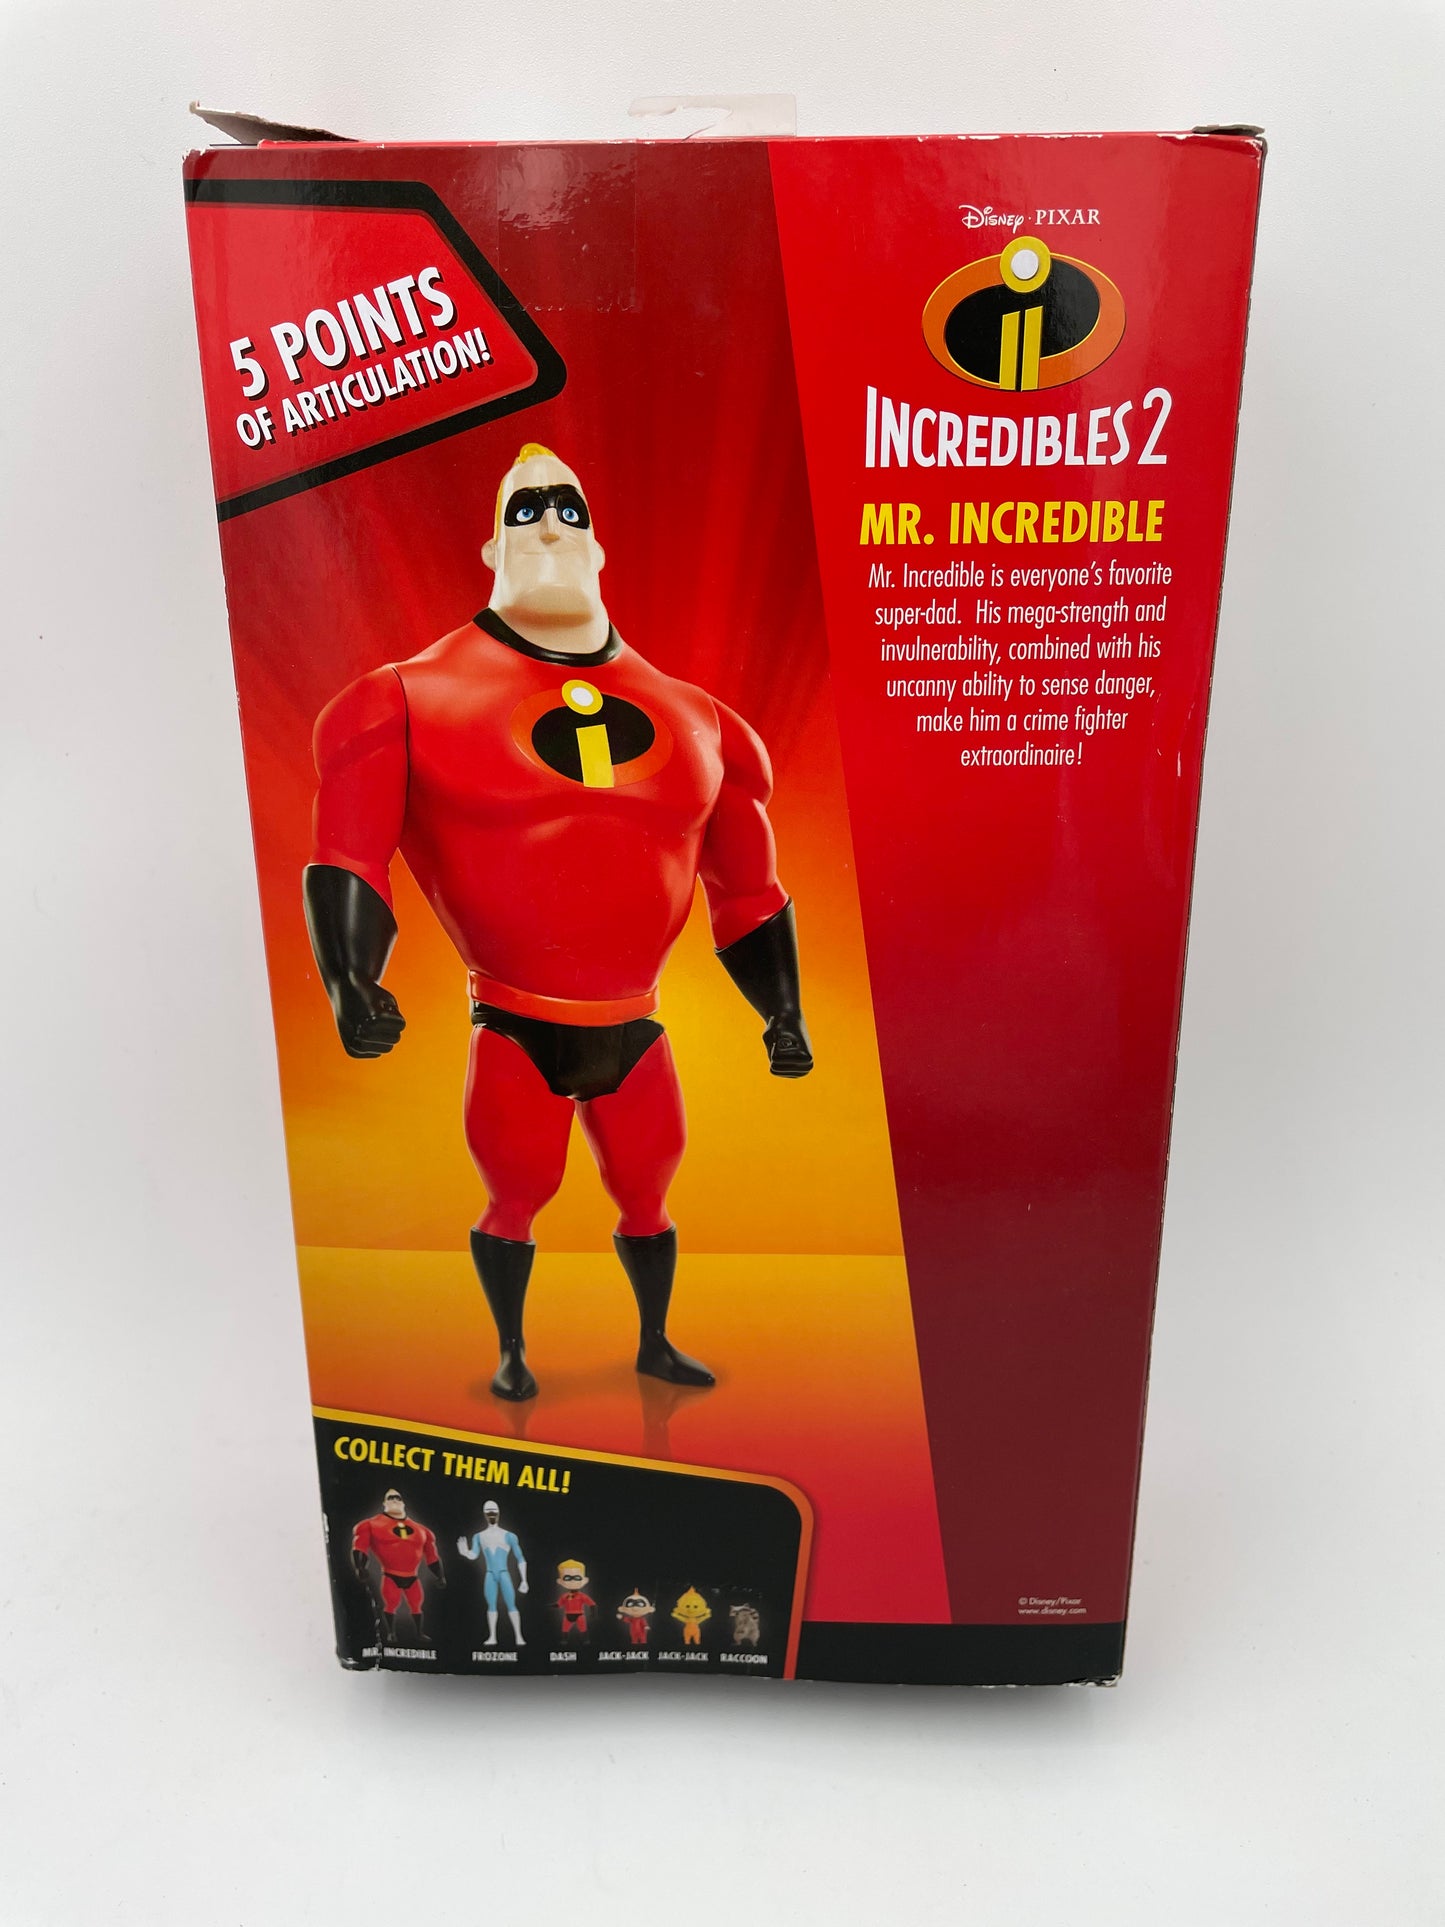 The Incredibles 2 - Mr Incredible 2018 #100328